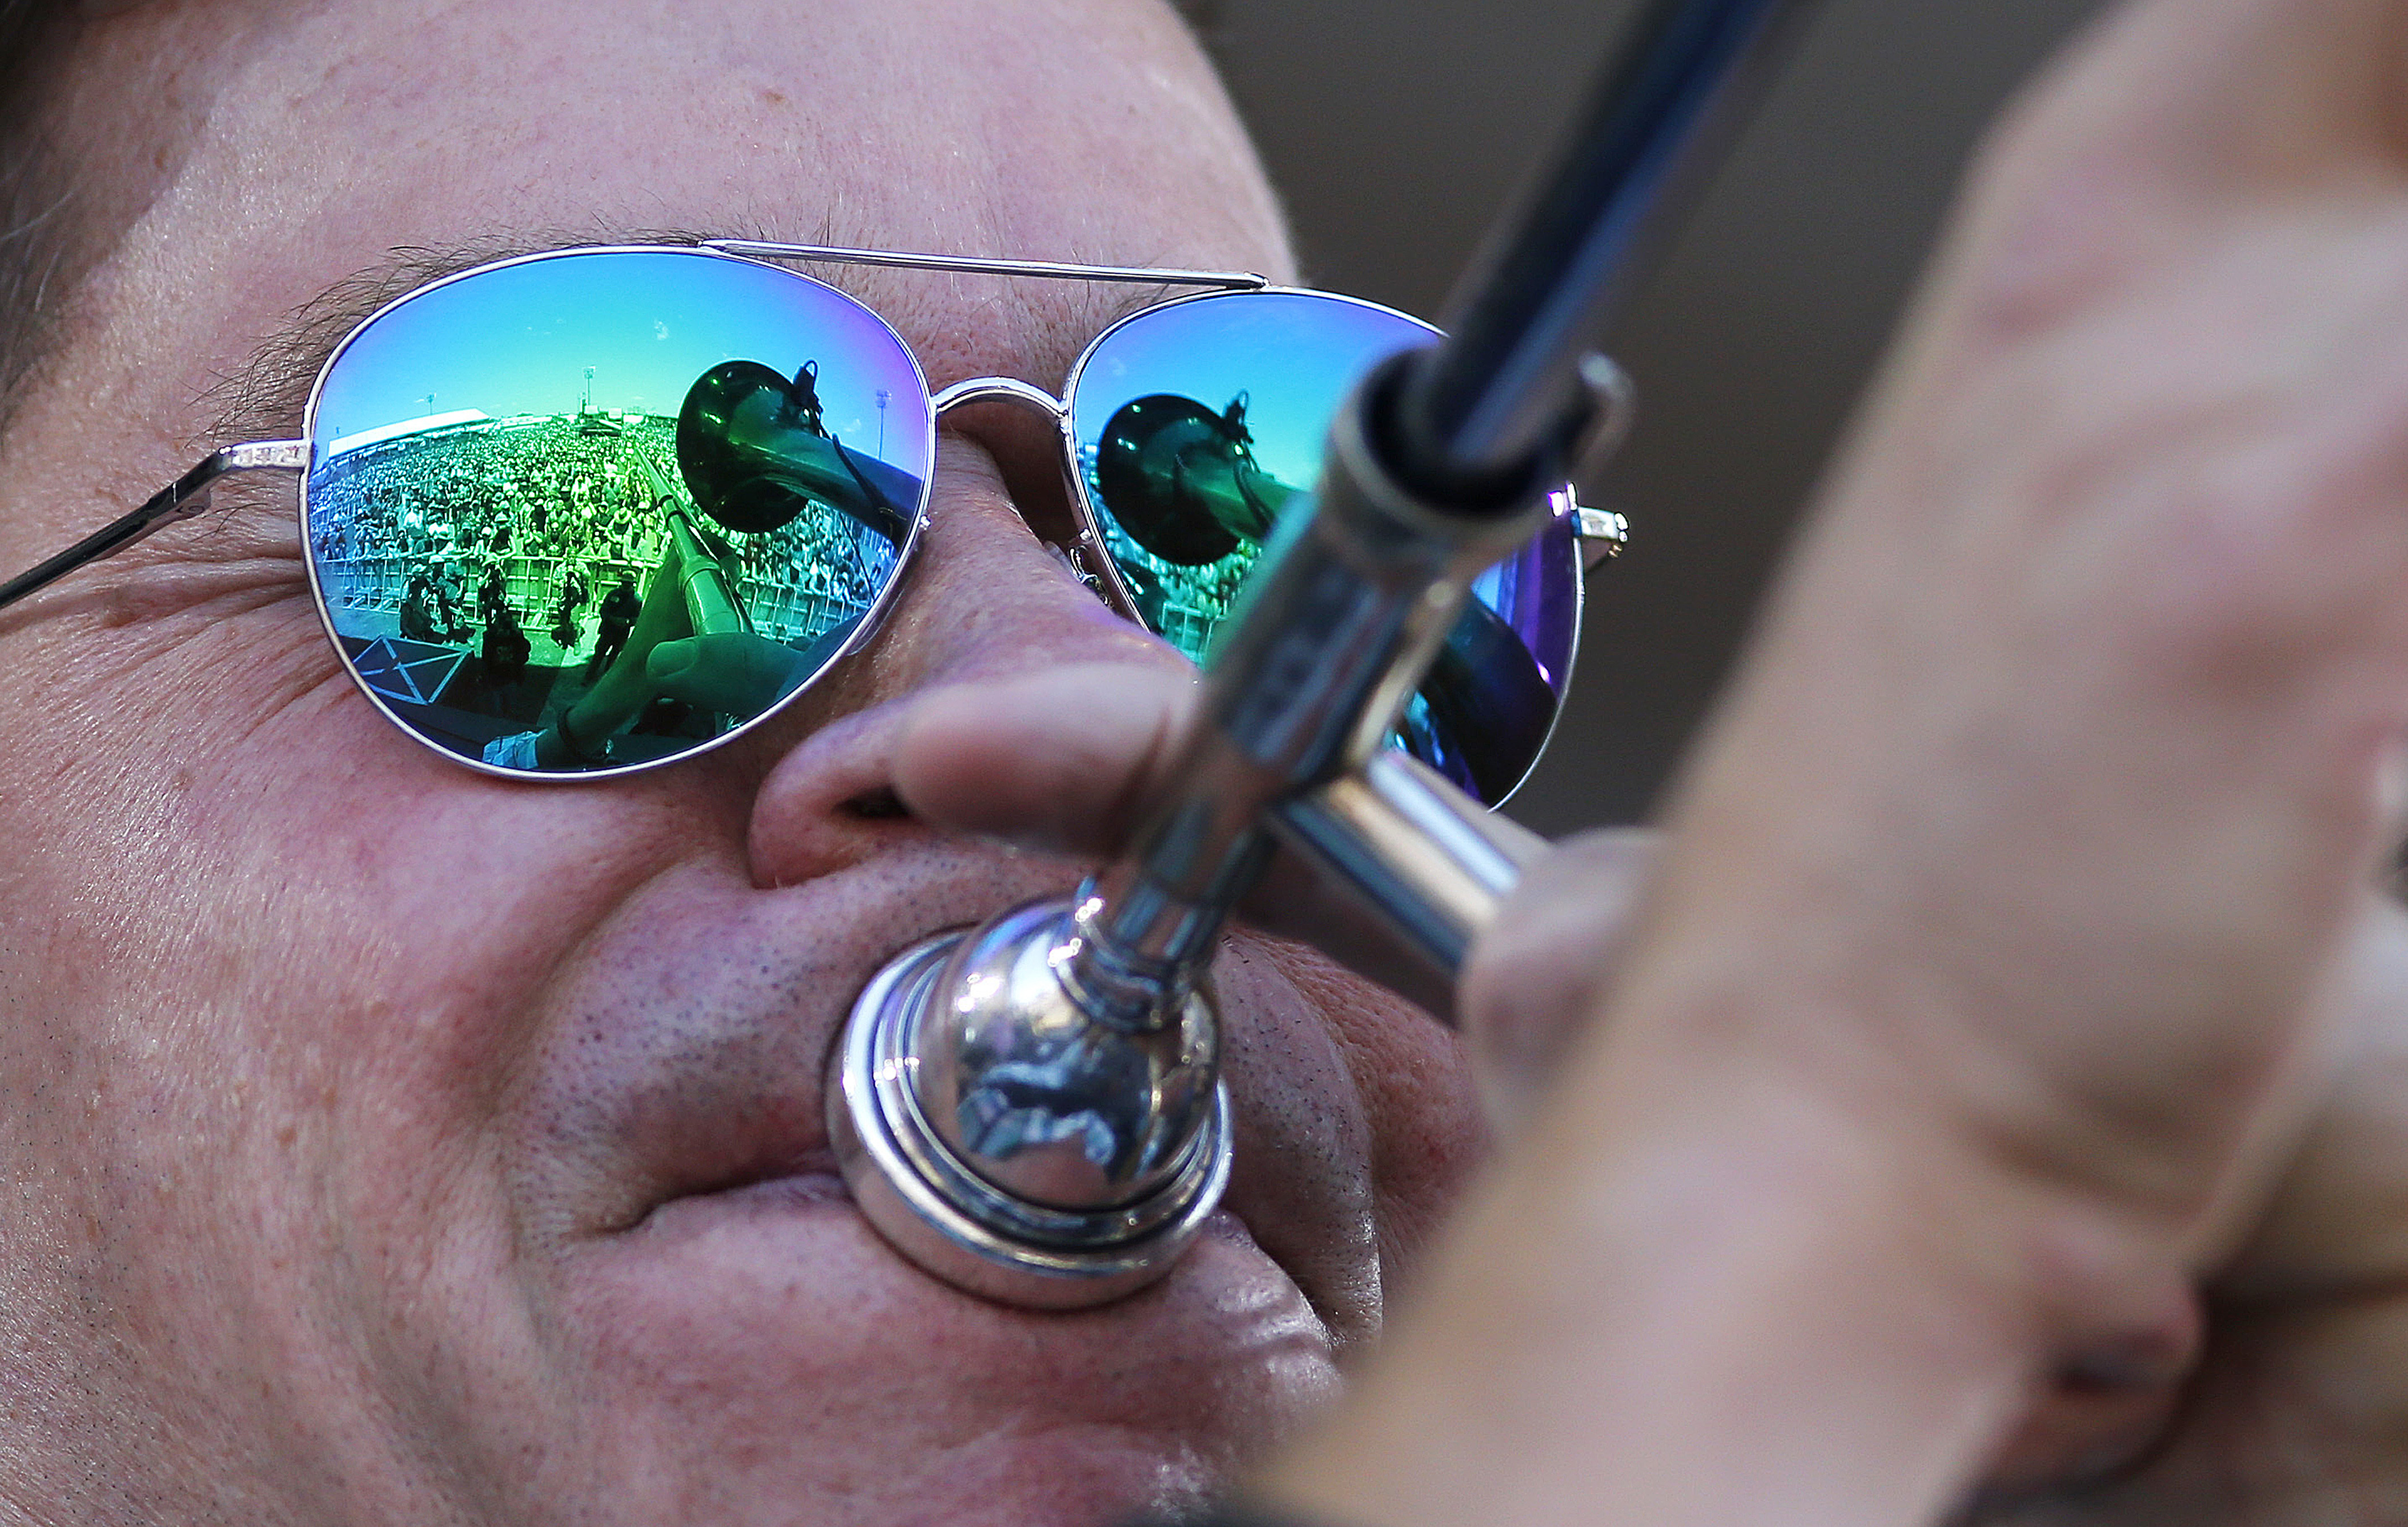 The trombone of Mark Mullins, of the brass funk rock band Bonerama, and the crowd at the Acura Stage, are seen in the reflection of his sunglasses as he performs with the band at the New Orleans Jazz and Heritage Festival in New Orleans, Friday, May 5, 2017. (AP Photo/Gerald Herbert)